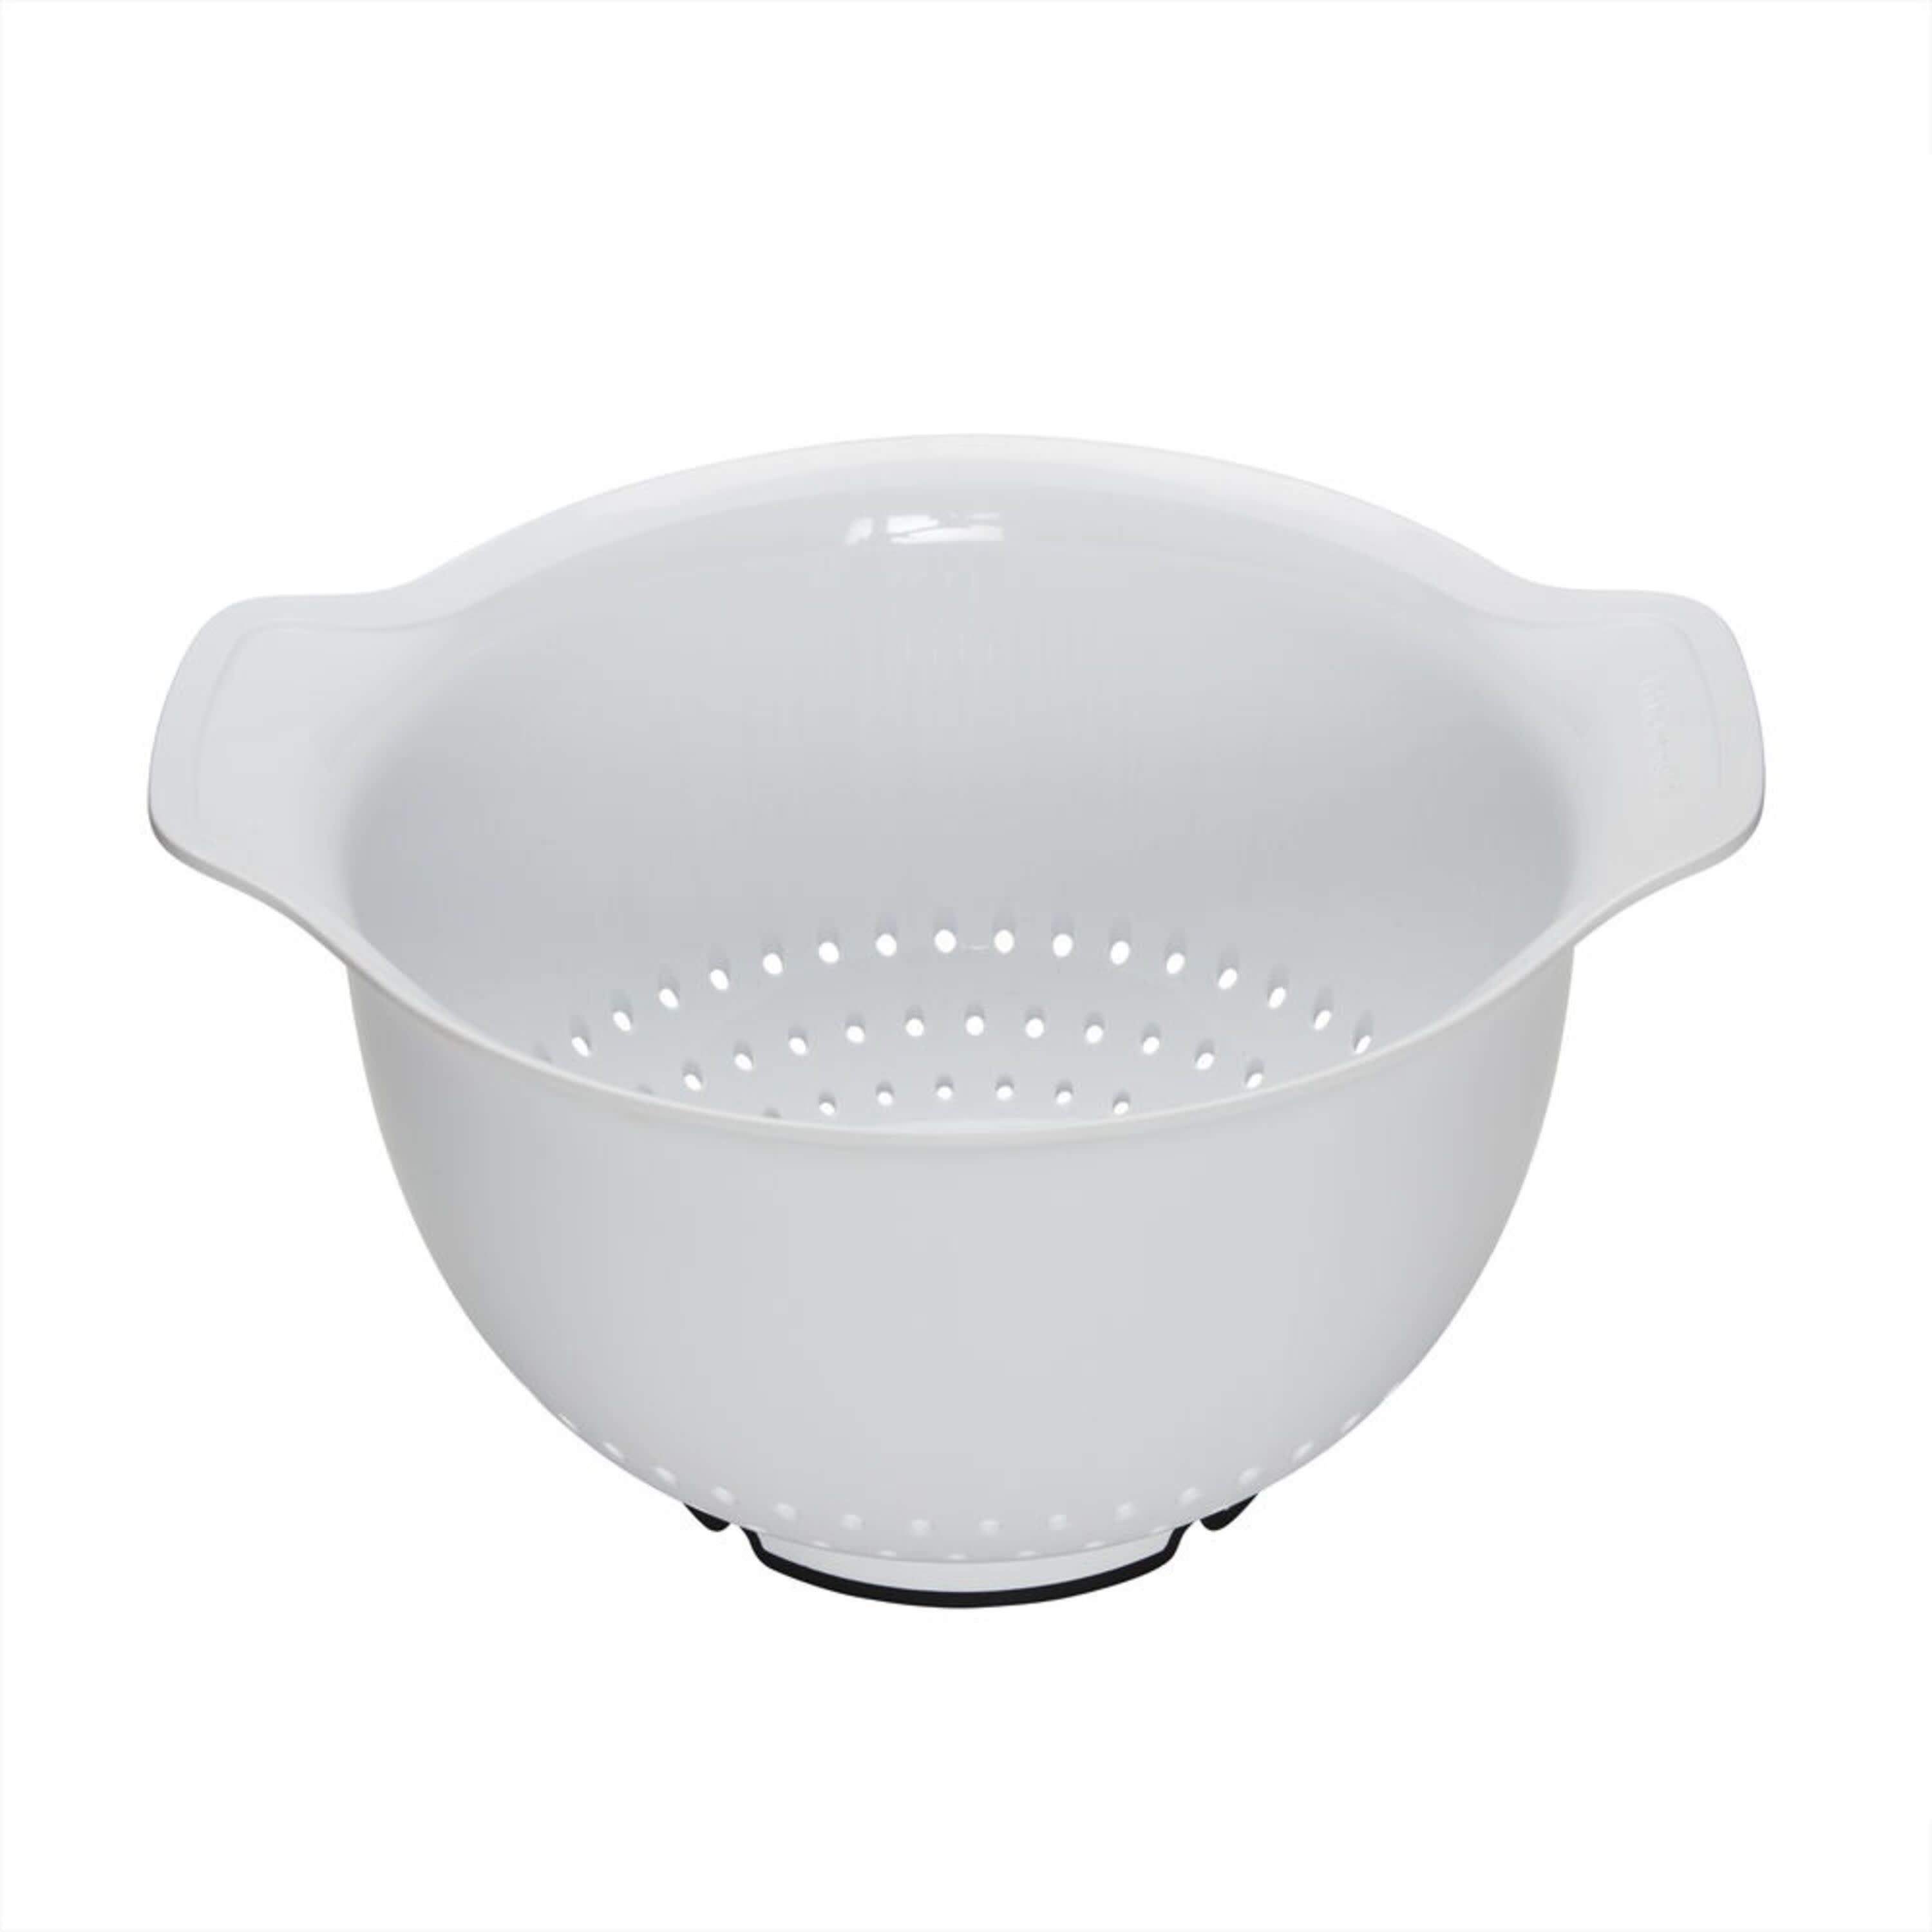 KitchenAid Fruit and Vegetable Strainer in White